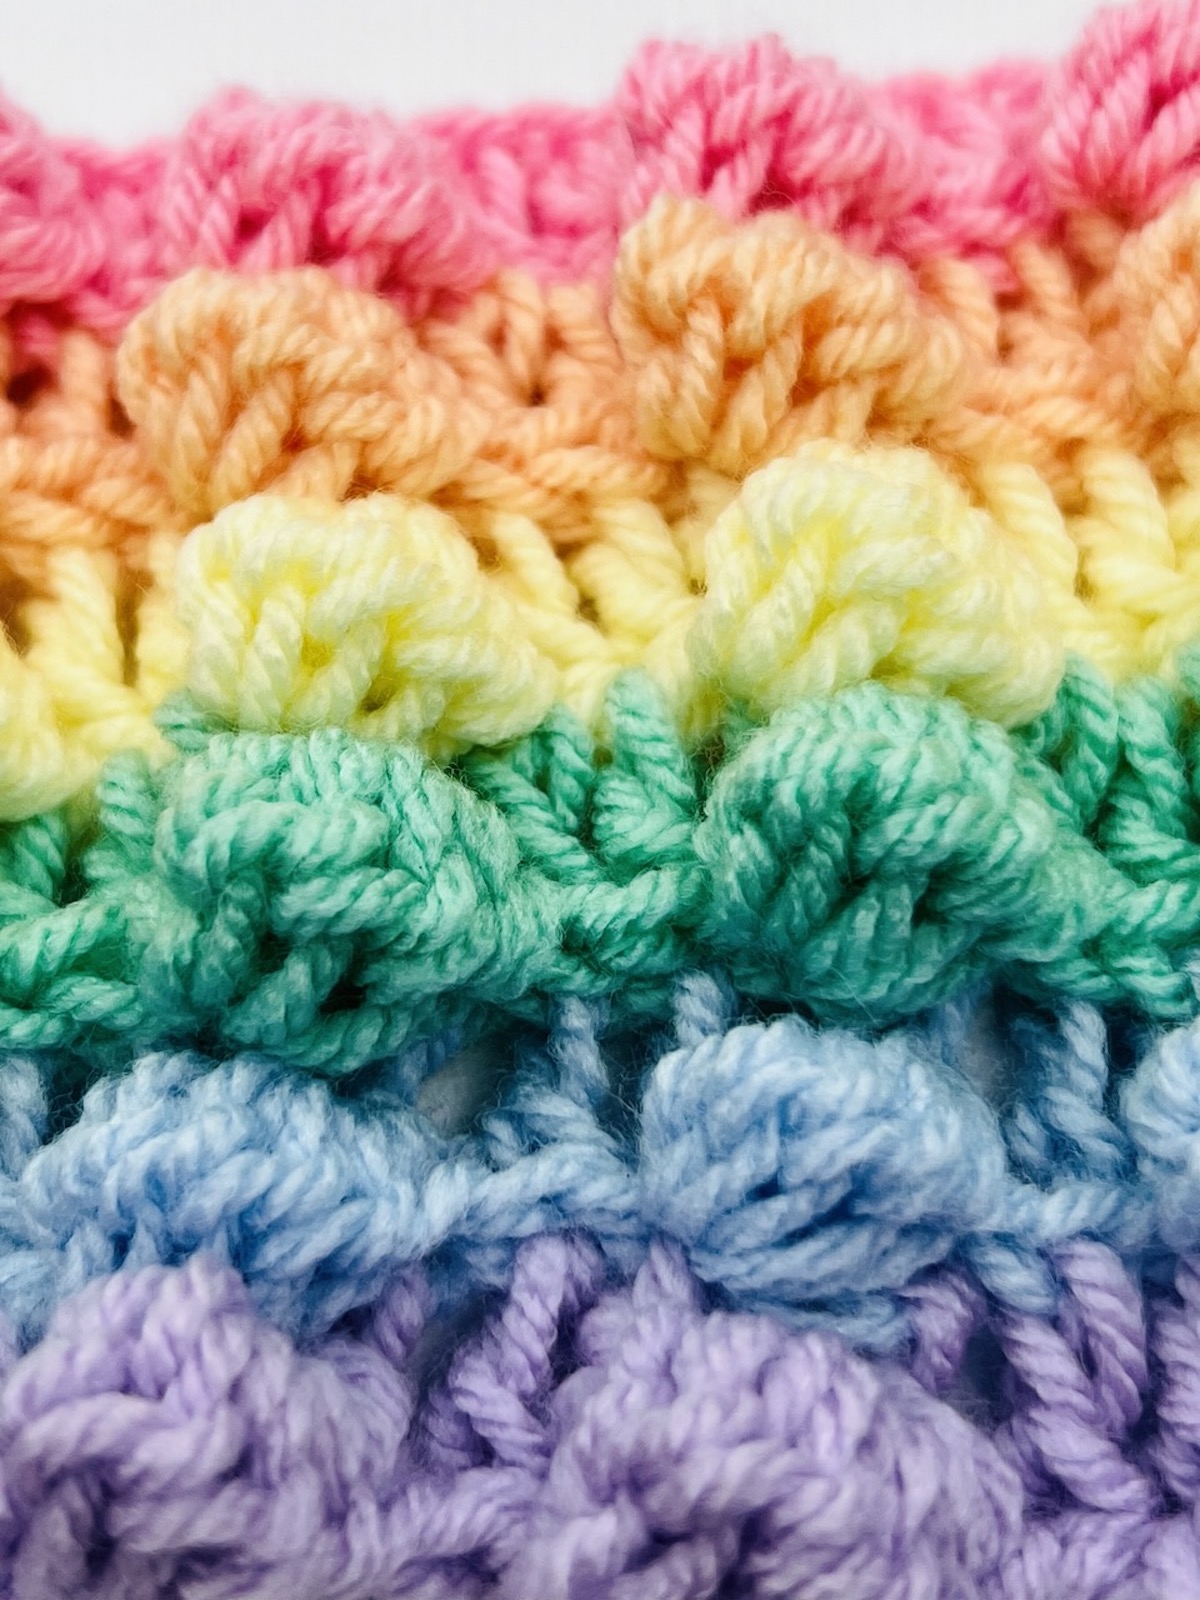 Finished multicolored bobble stitch pattern in pink, orange, yellow, green, blue, and purple.